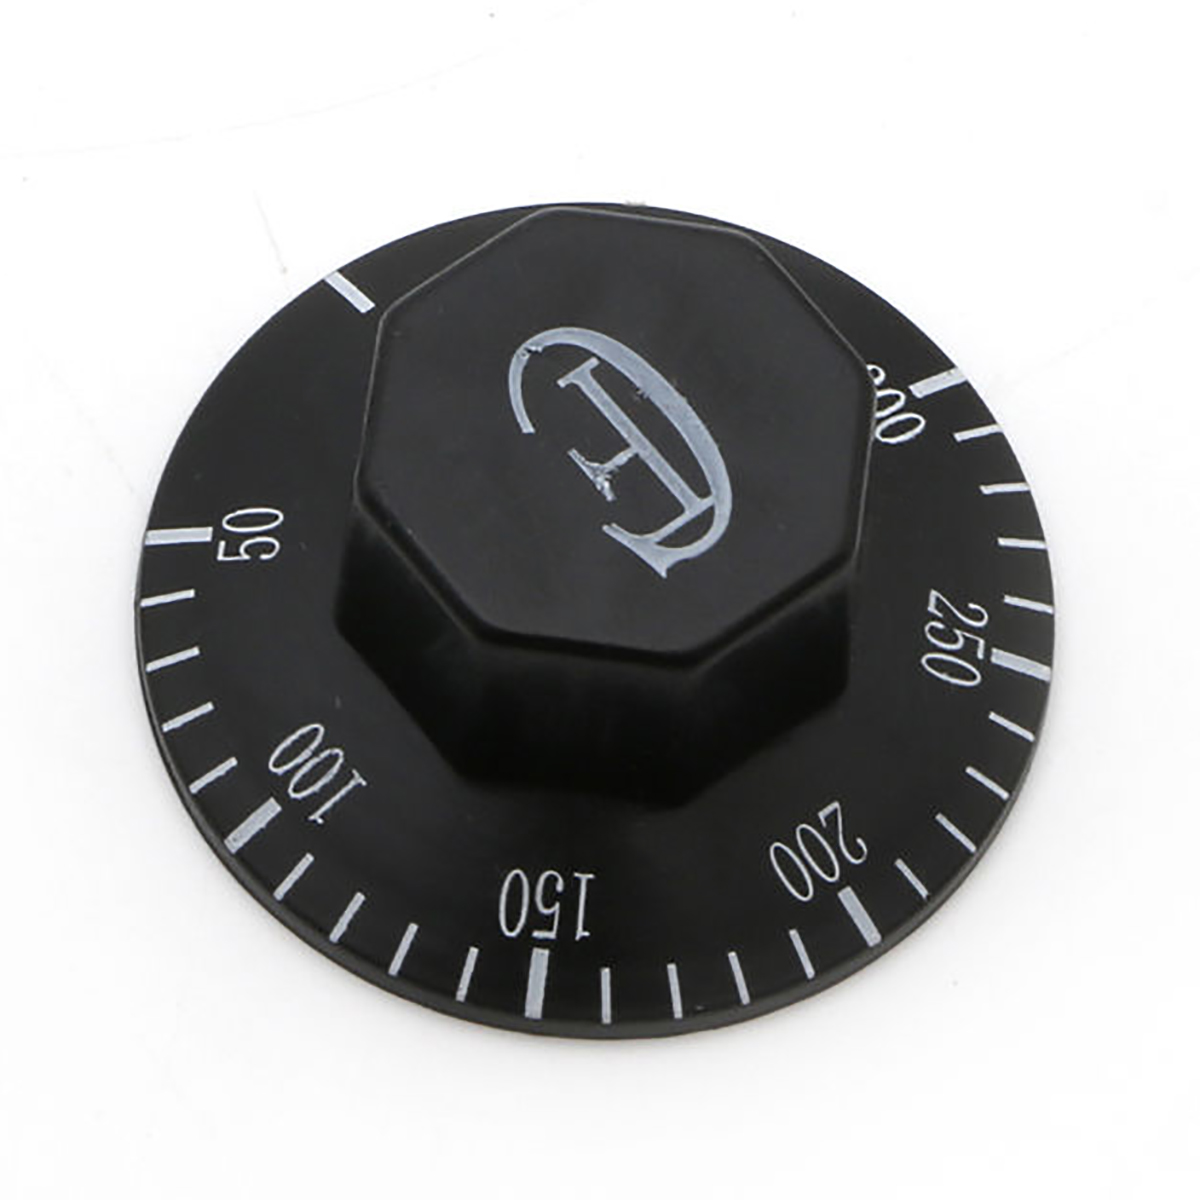 AC 220V Dial Thermostat Temperature Control Switch For 16A Electric Oven 50-300 Celsius Degree